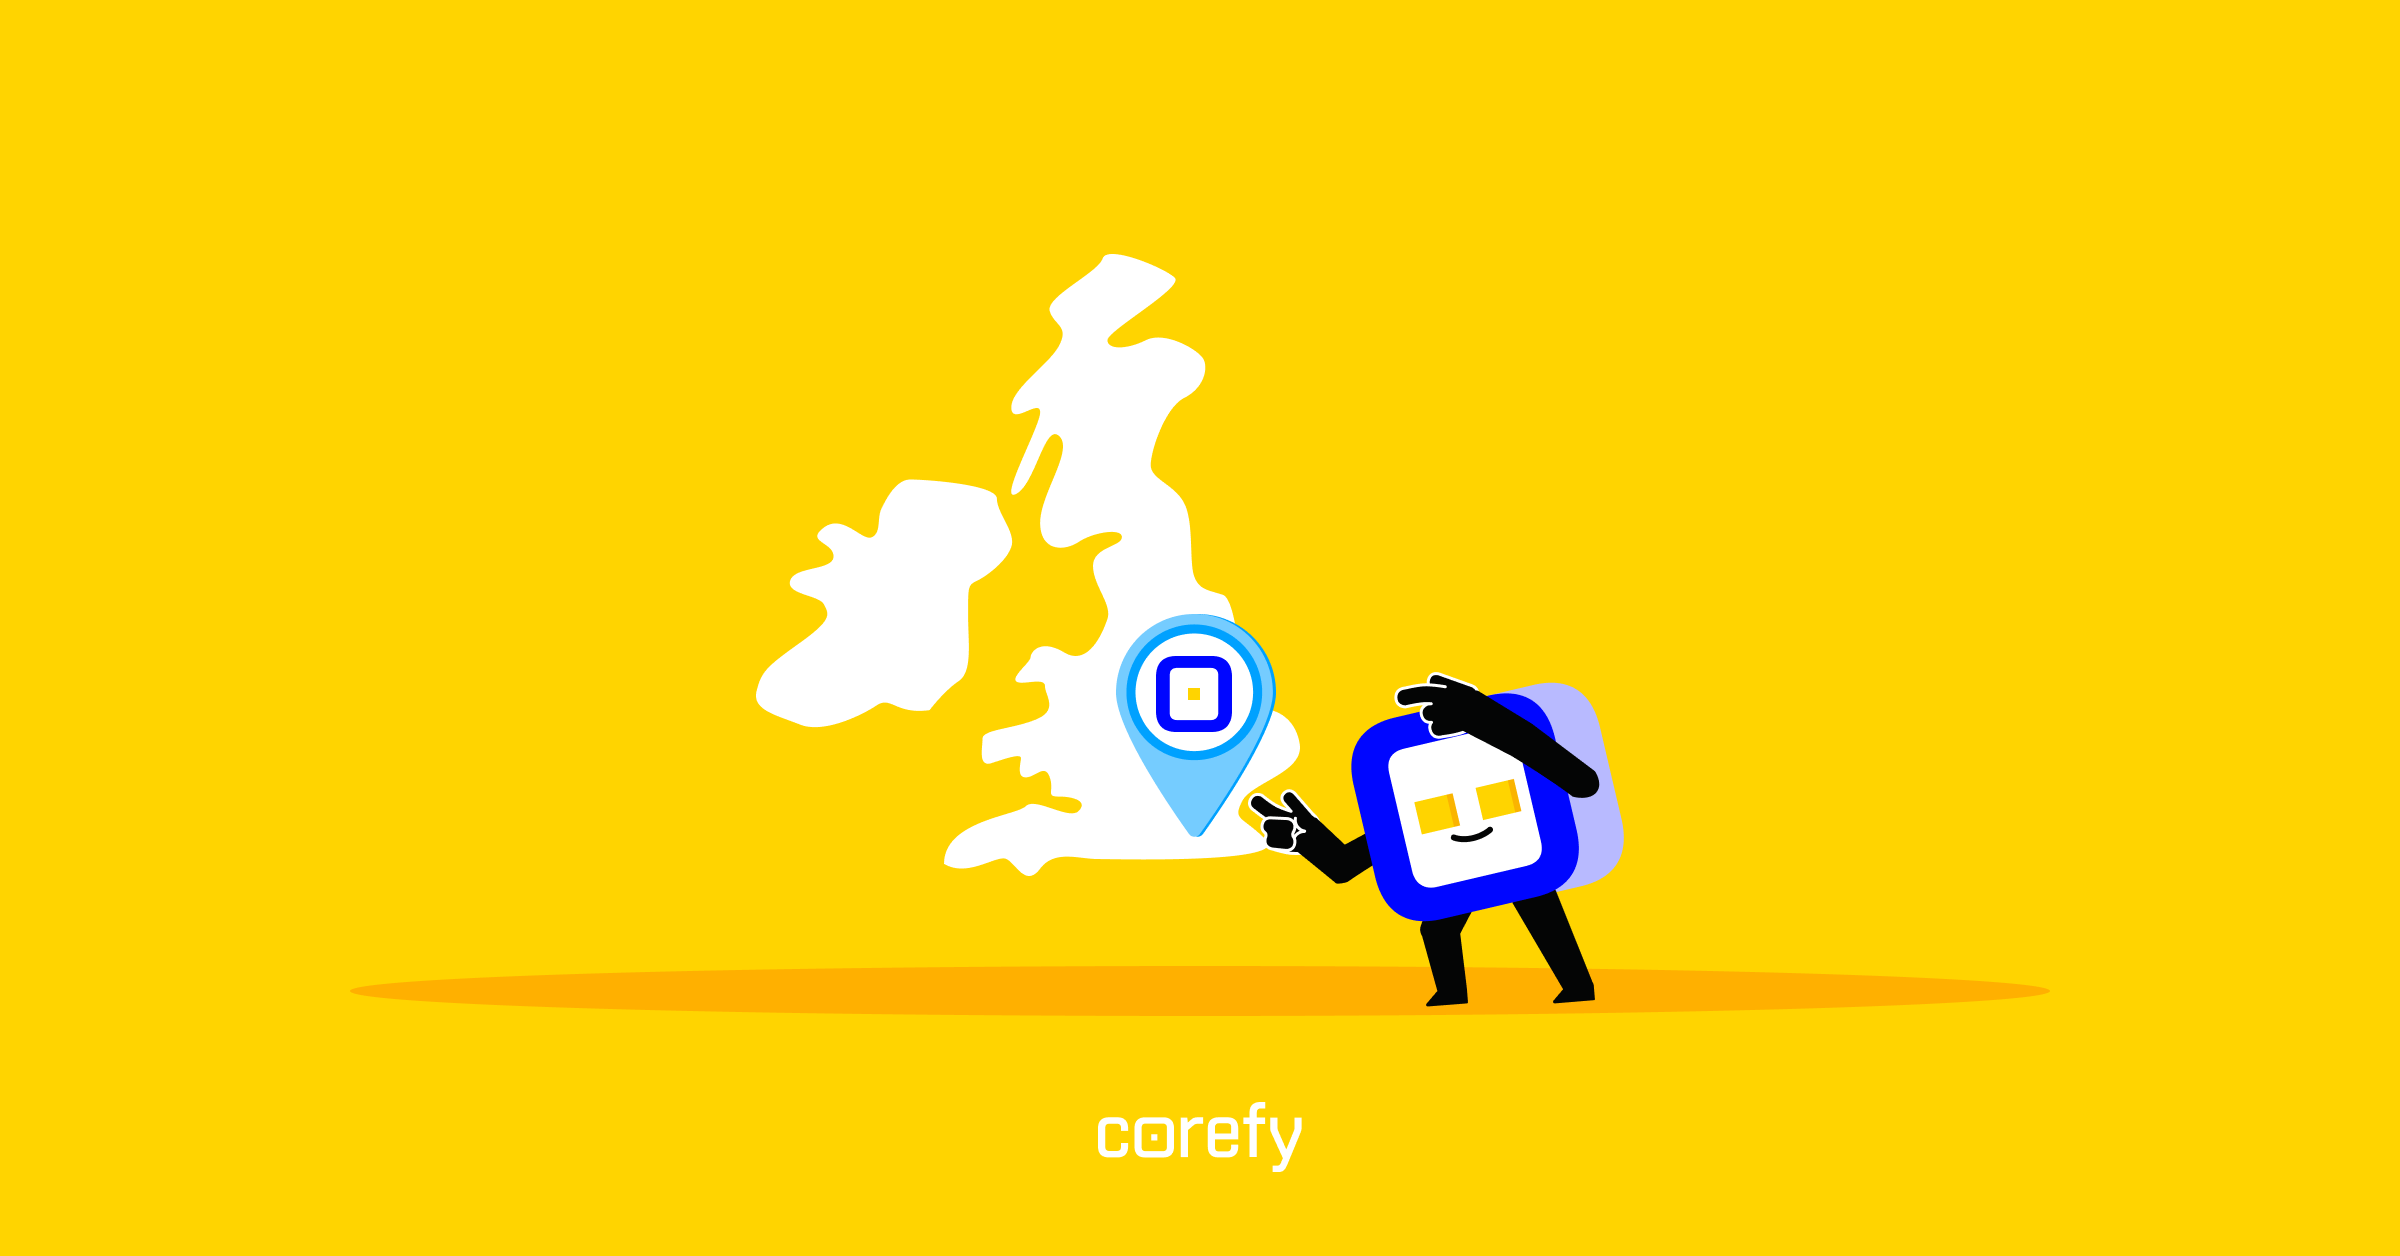 Corefy UK head office has moved to a new location